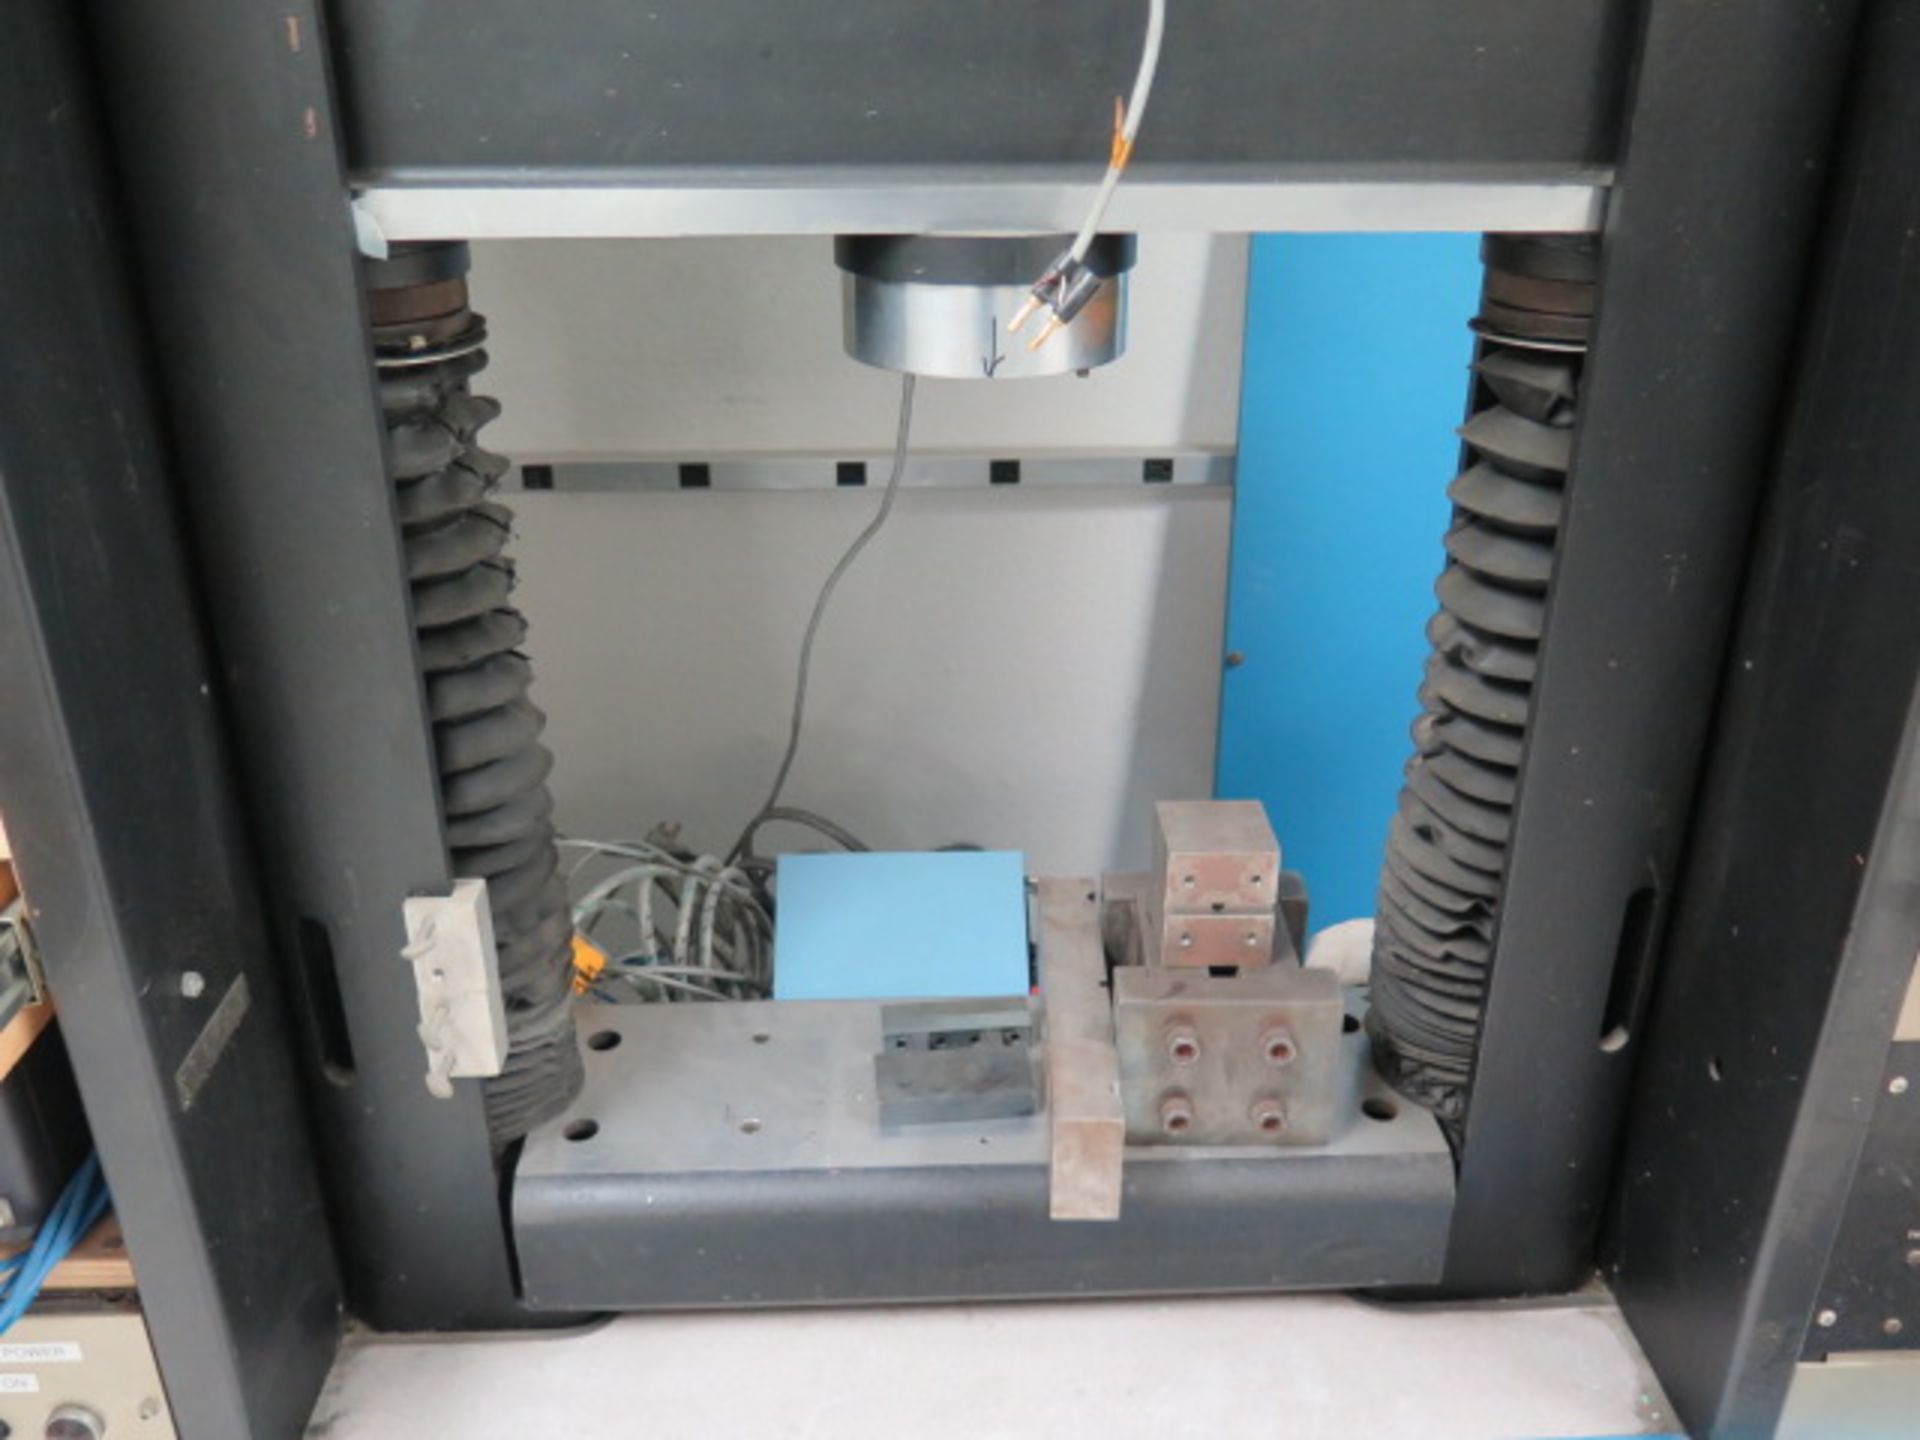 Instron Universal Tension and Compression Testing w/ Instron Controls, Test Fixtures, SOLD AS IS - Image 5 of 29